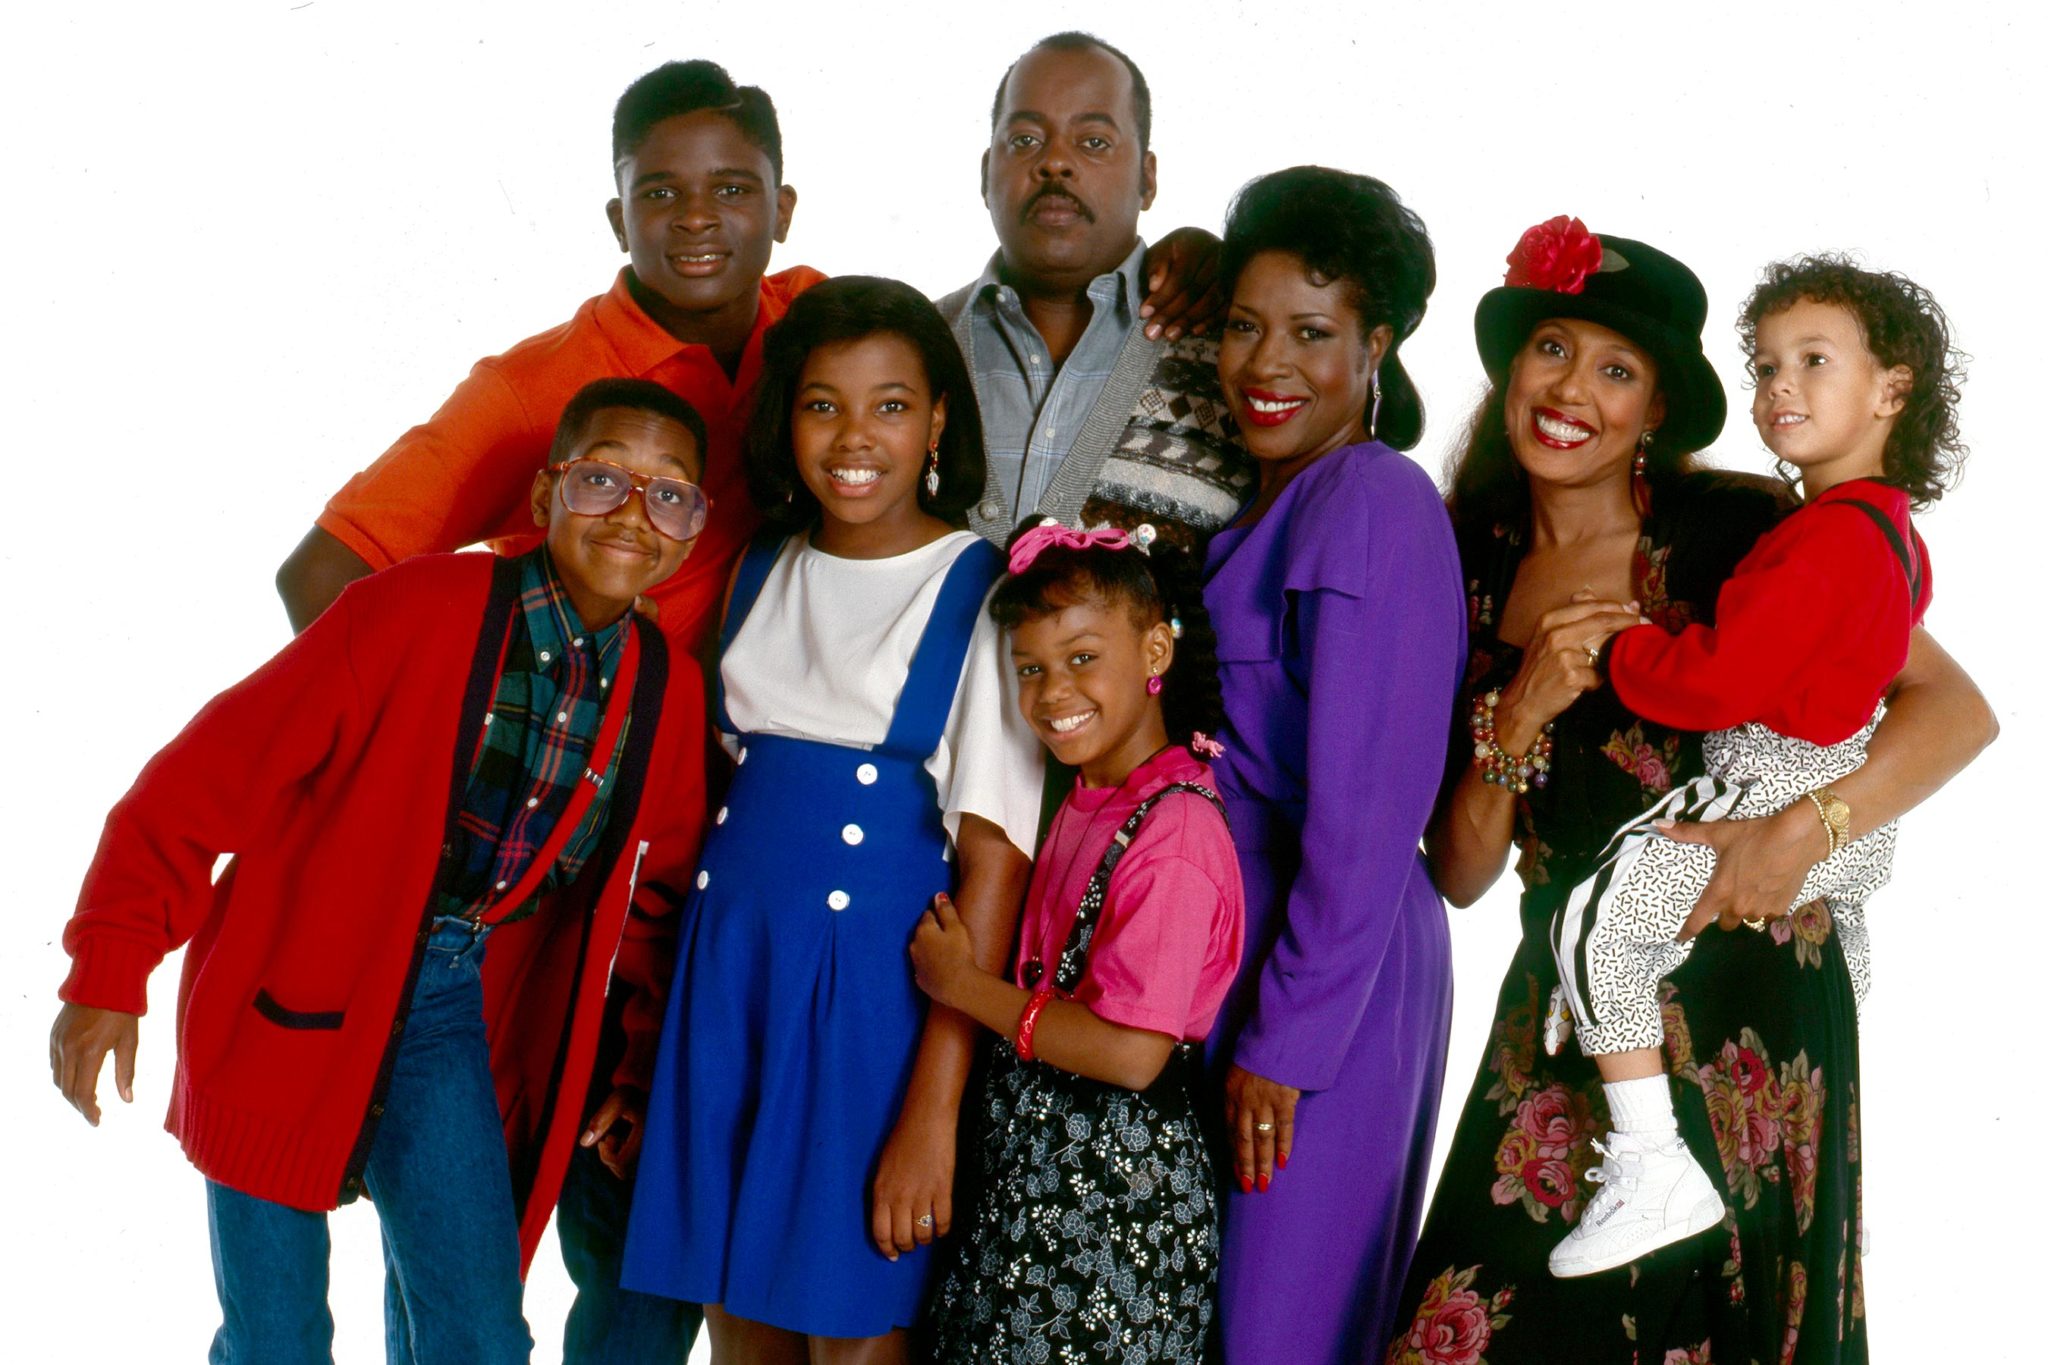 AT&T Wants to Reboot TGIF With New Versions of ‘Step by Step’, ‘Perfect Strangers’ & ‘Family Matters’